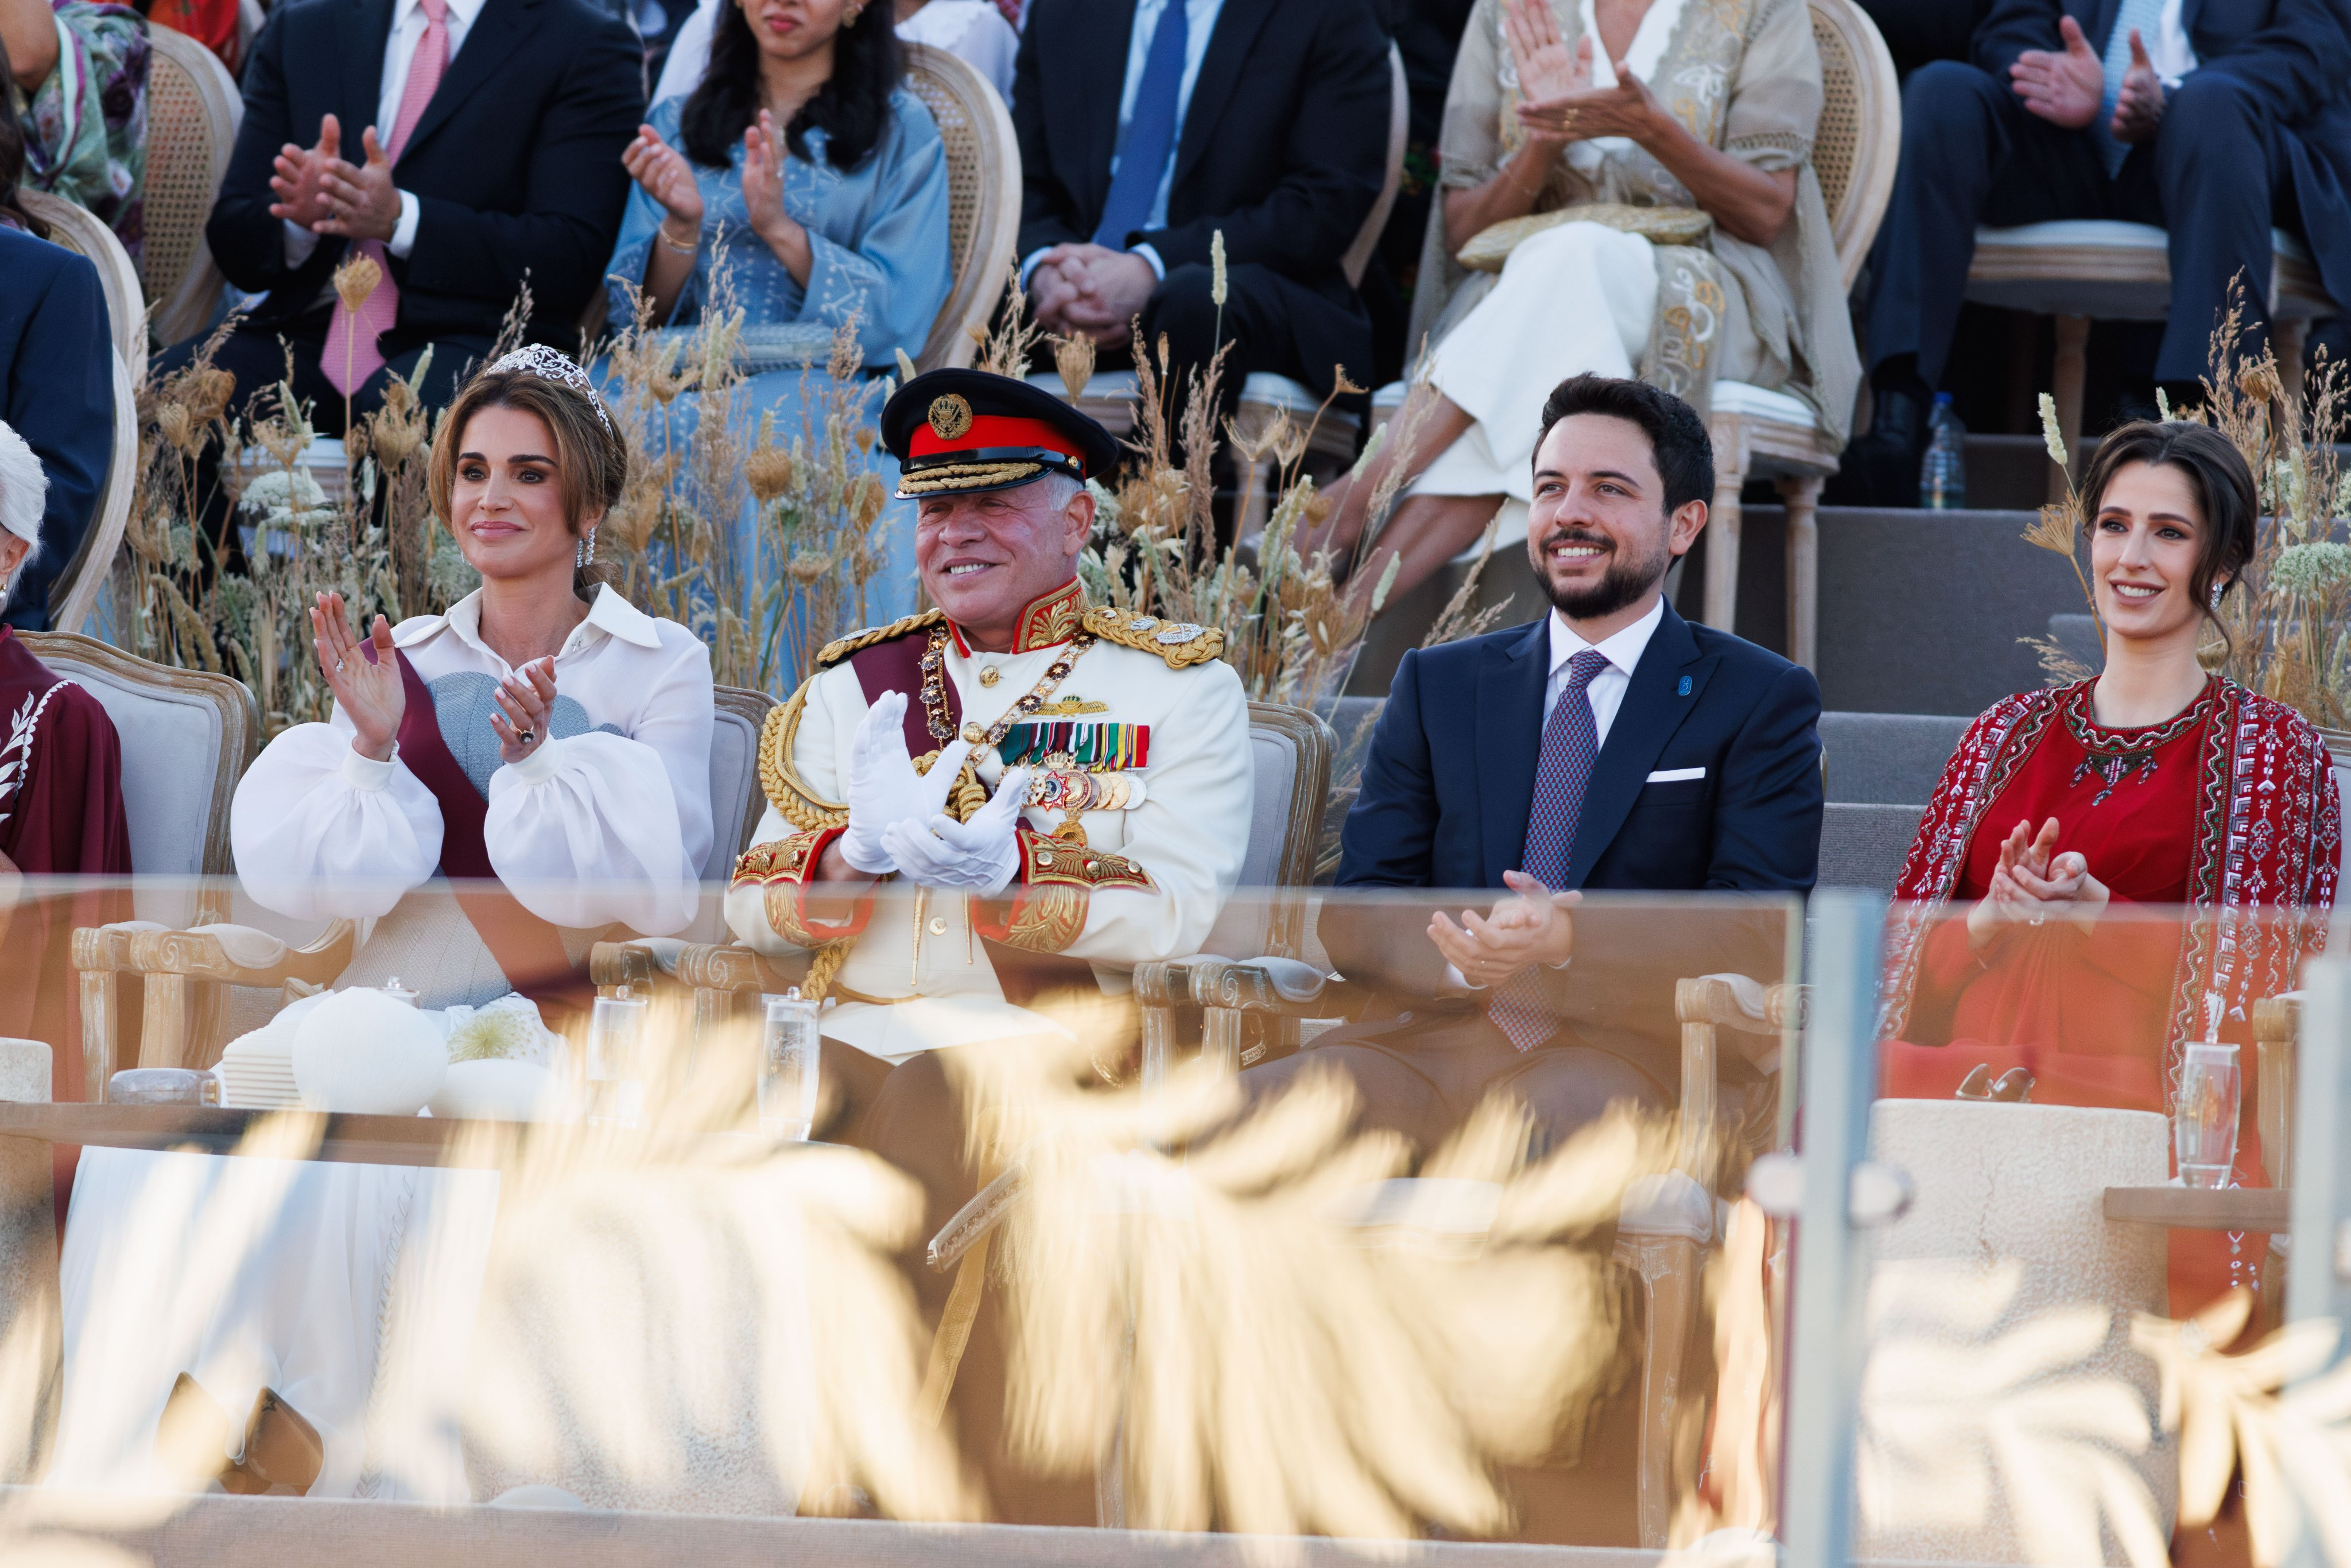 King, Queen, and Crown Prince attend national event marking Silver Jubilee